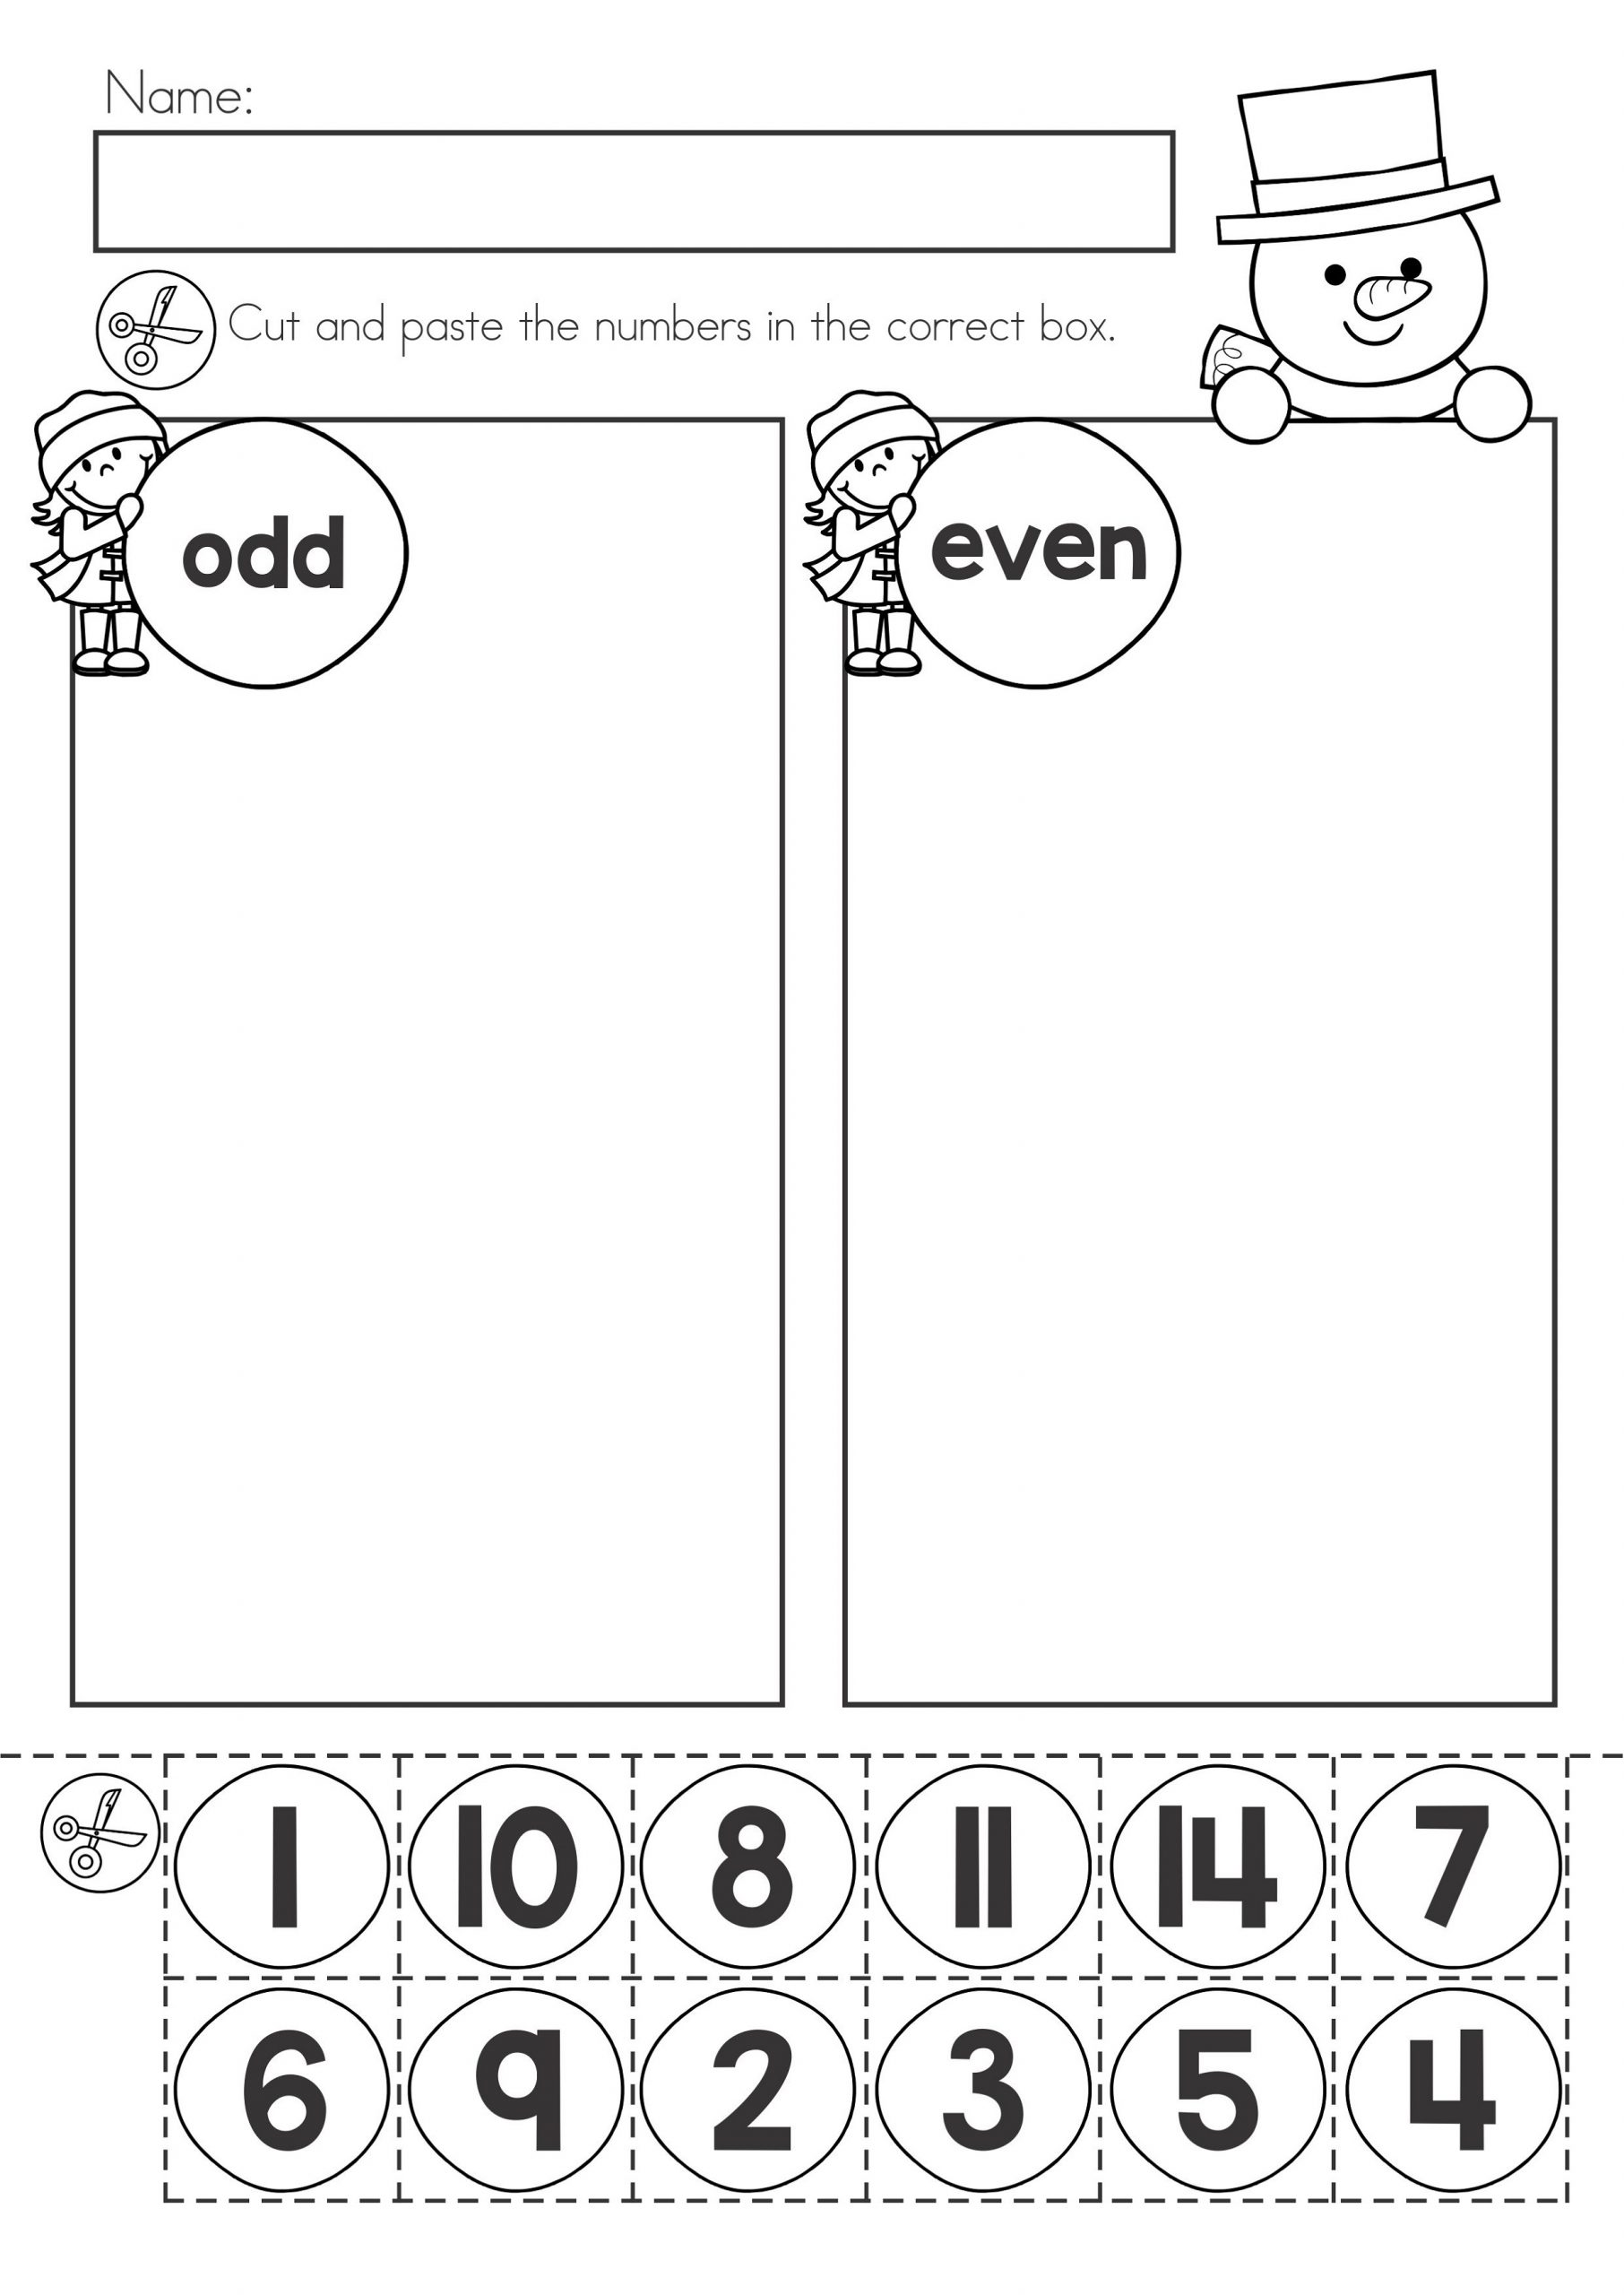 Discover Even Numbers Free Worksheet By Skoolgo Odd And Even Numbers Worksheets Activity